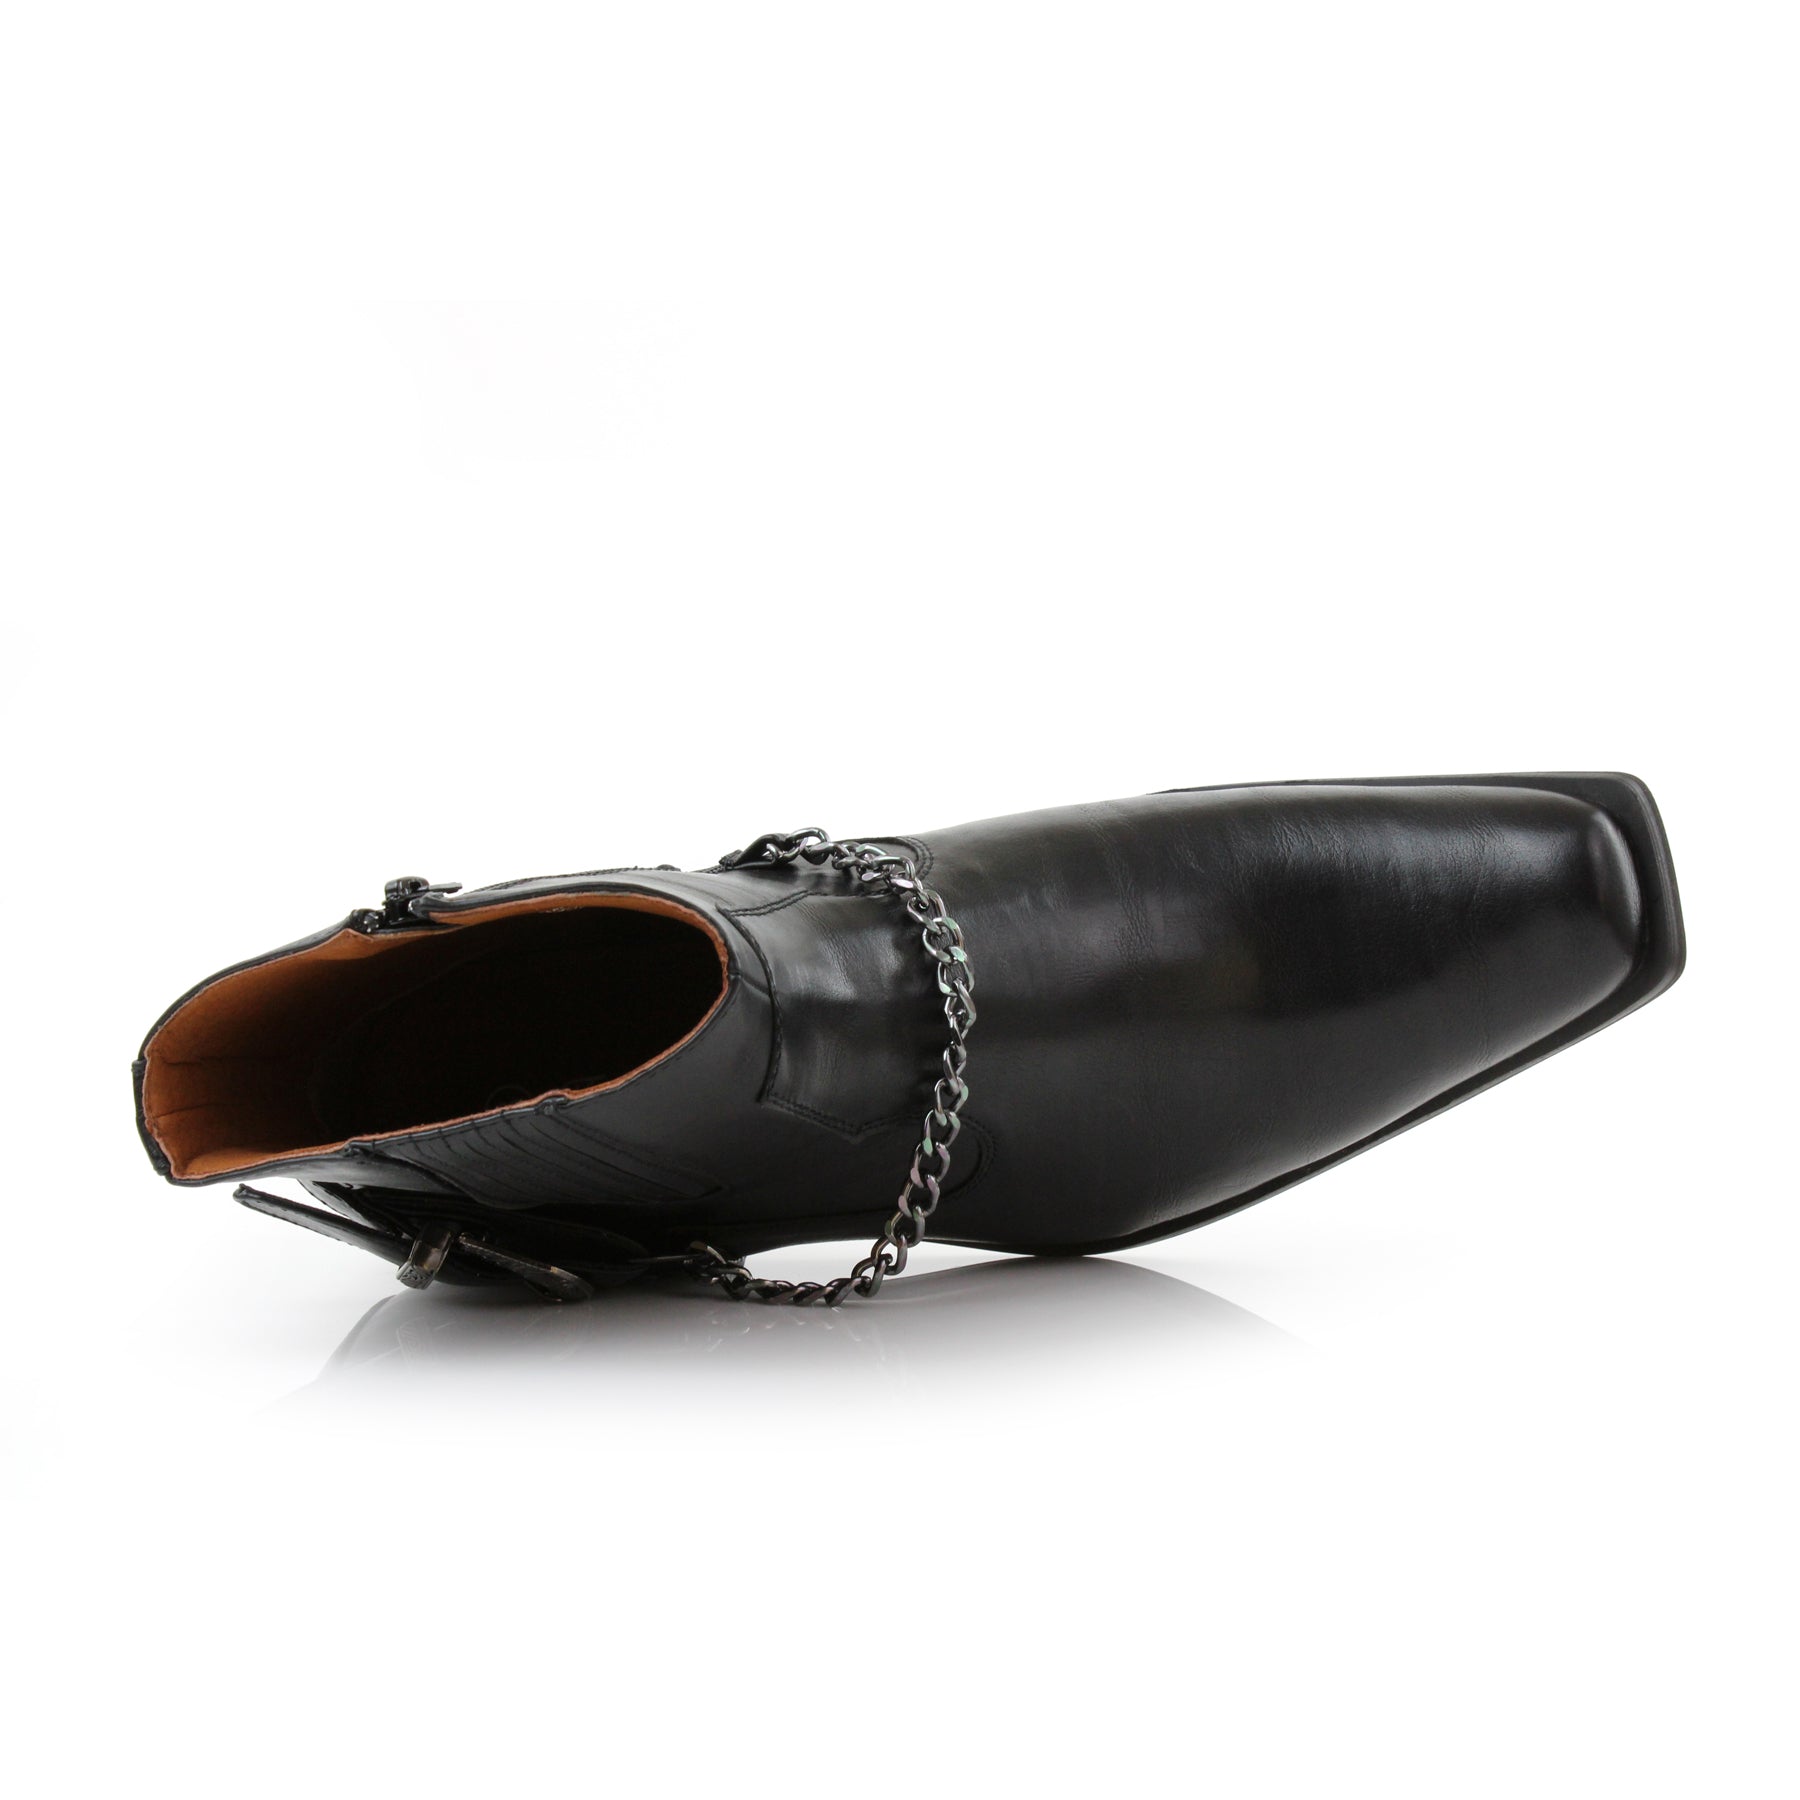 Faux Leather Cowboy Boots | Reyes by Ferro Aldo | Conal Footwear | Top-Down Angle View